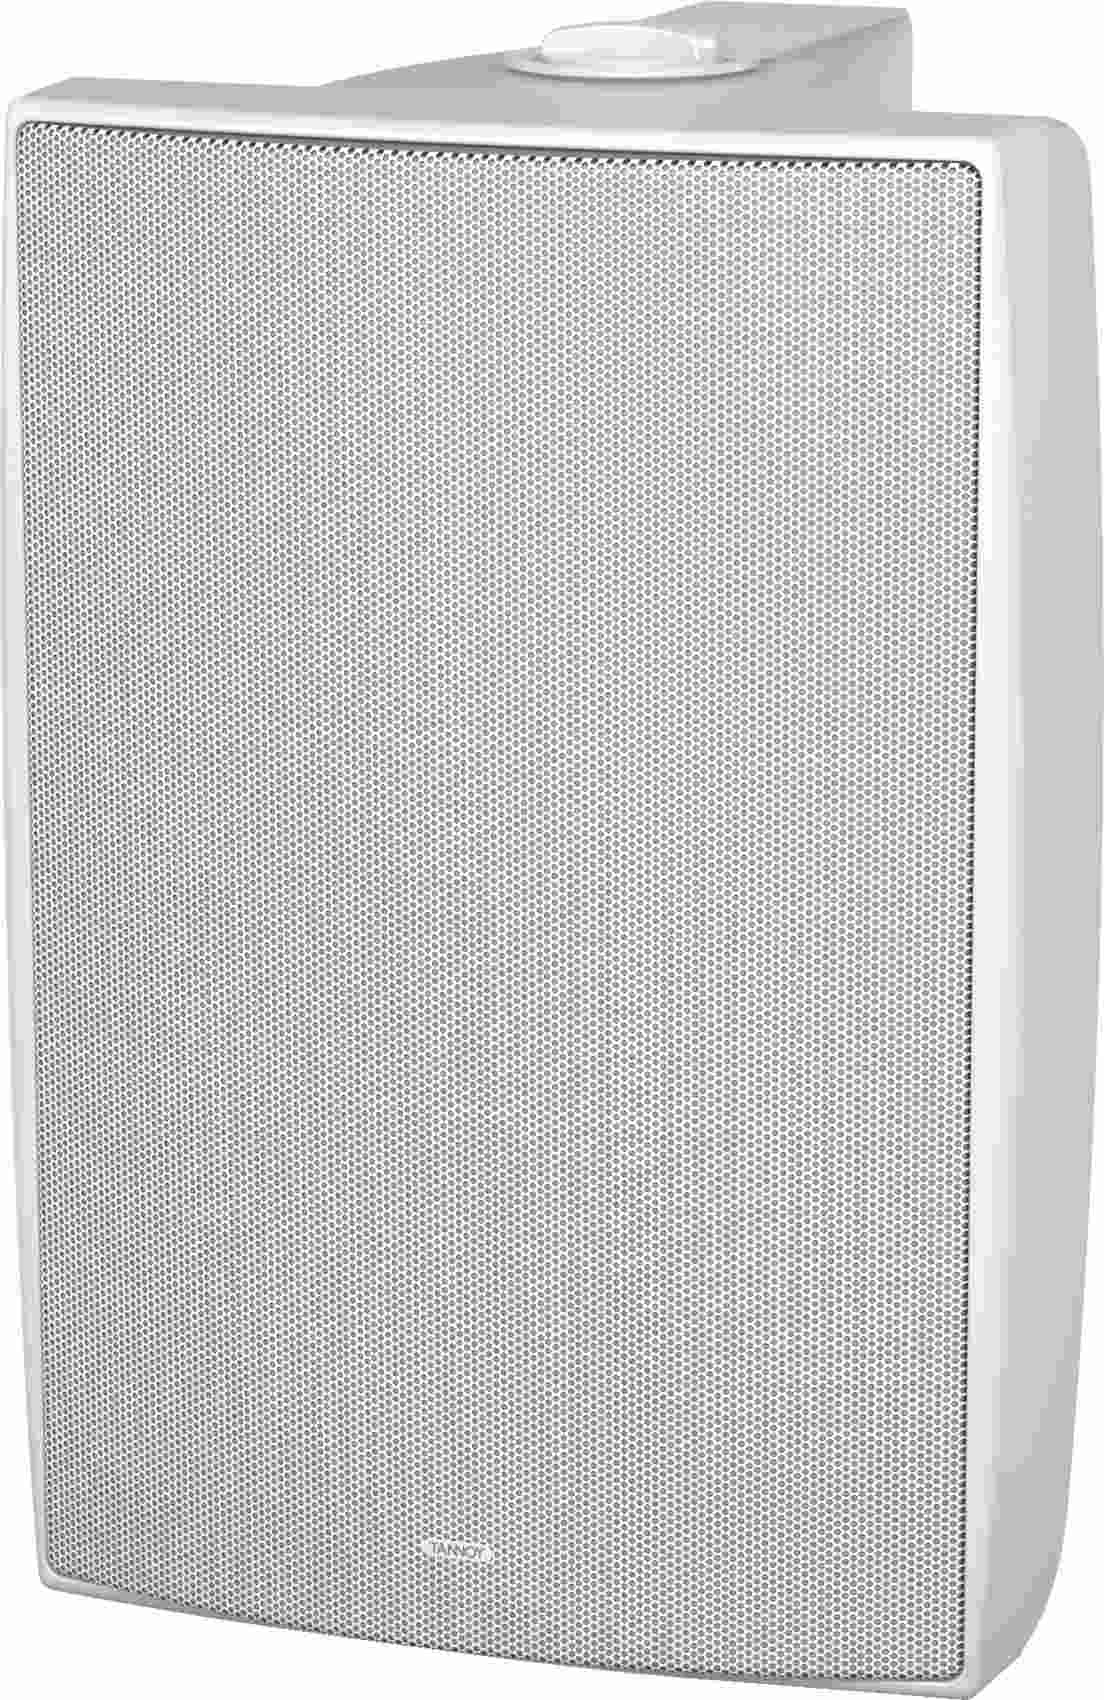 Tannoy DVS 8T-WH - фото 5